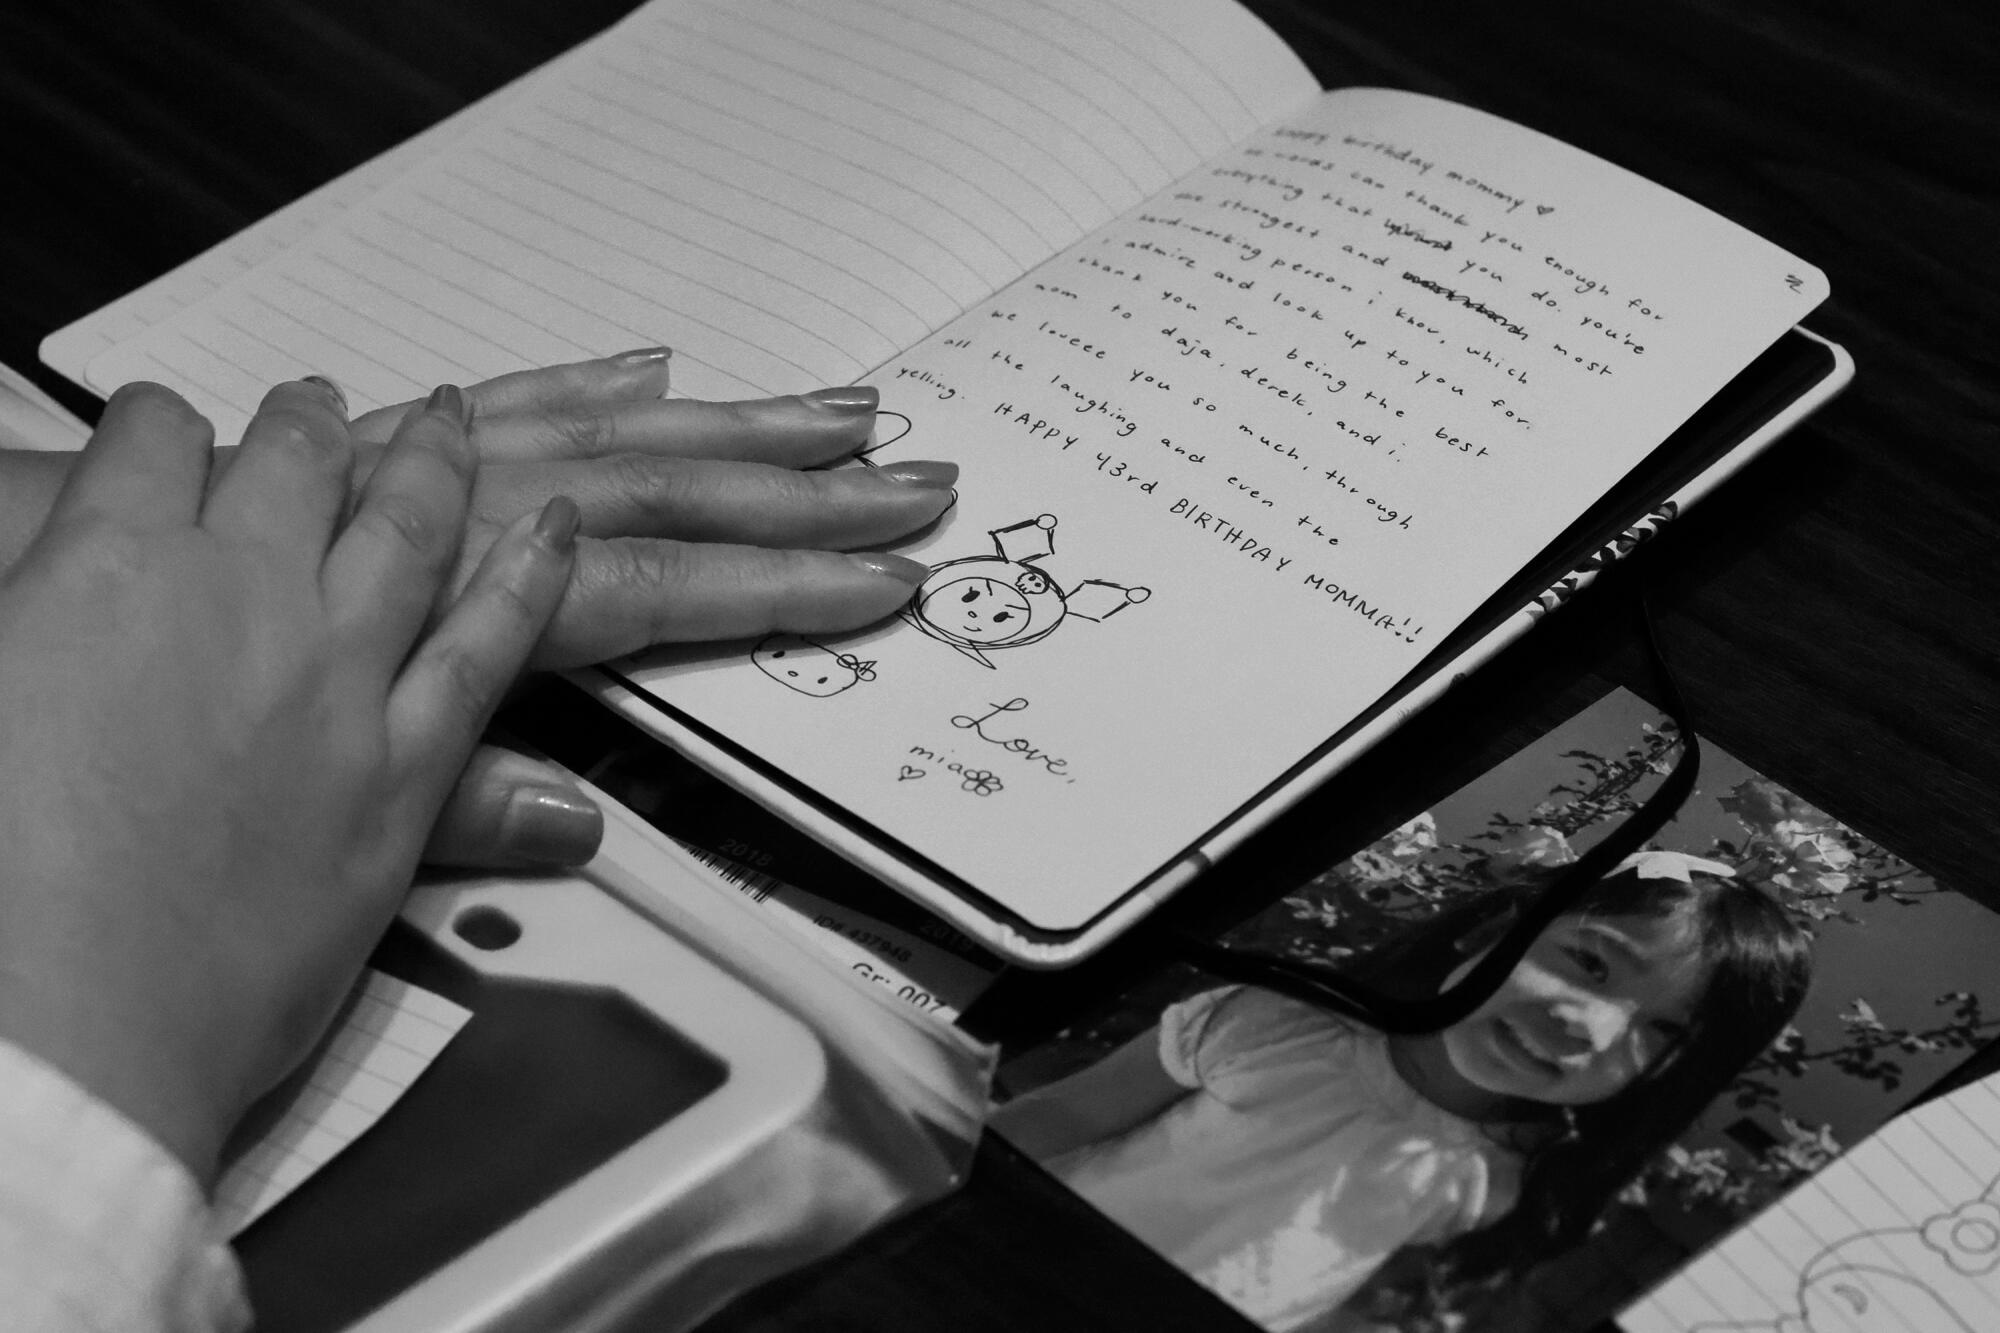 A pair of hands lie on a journal on top of a photo of a girl.